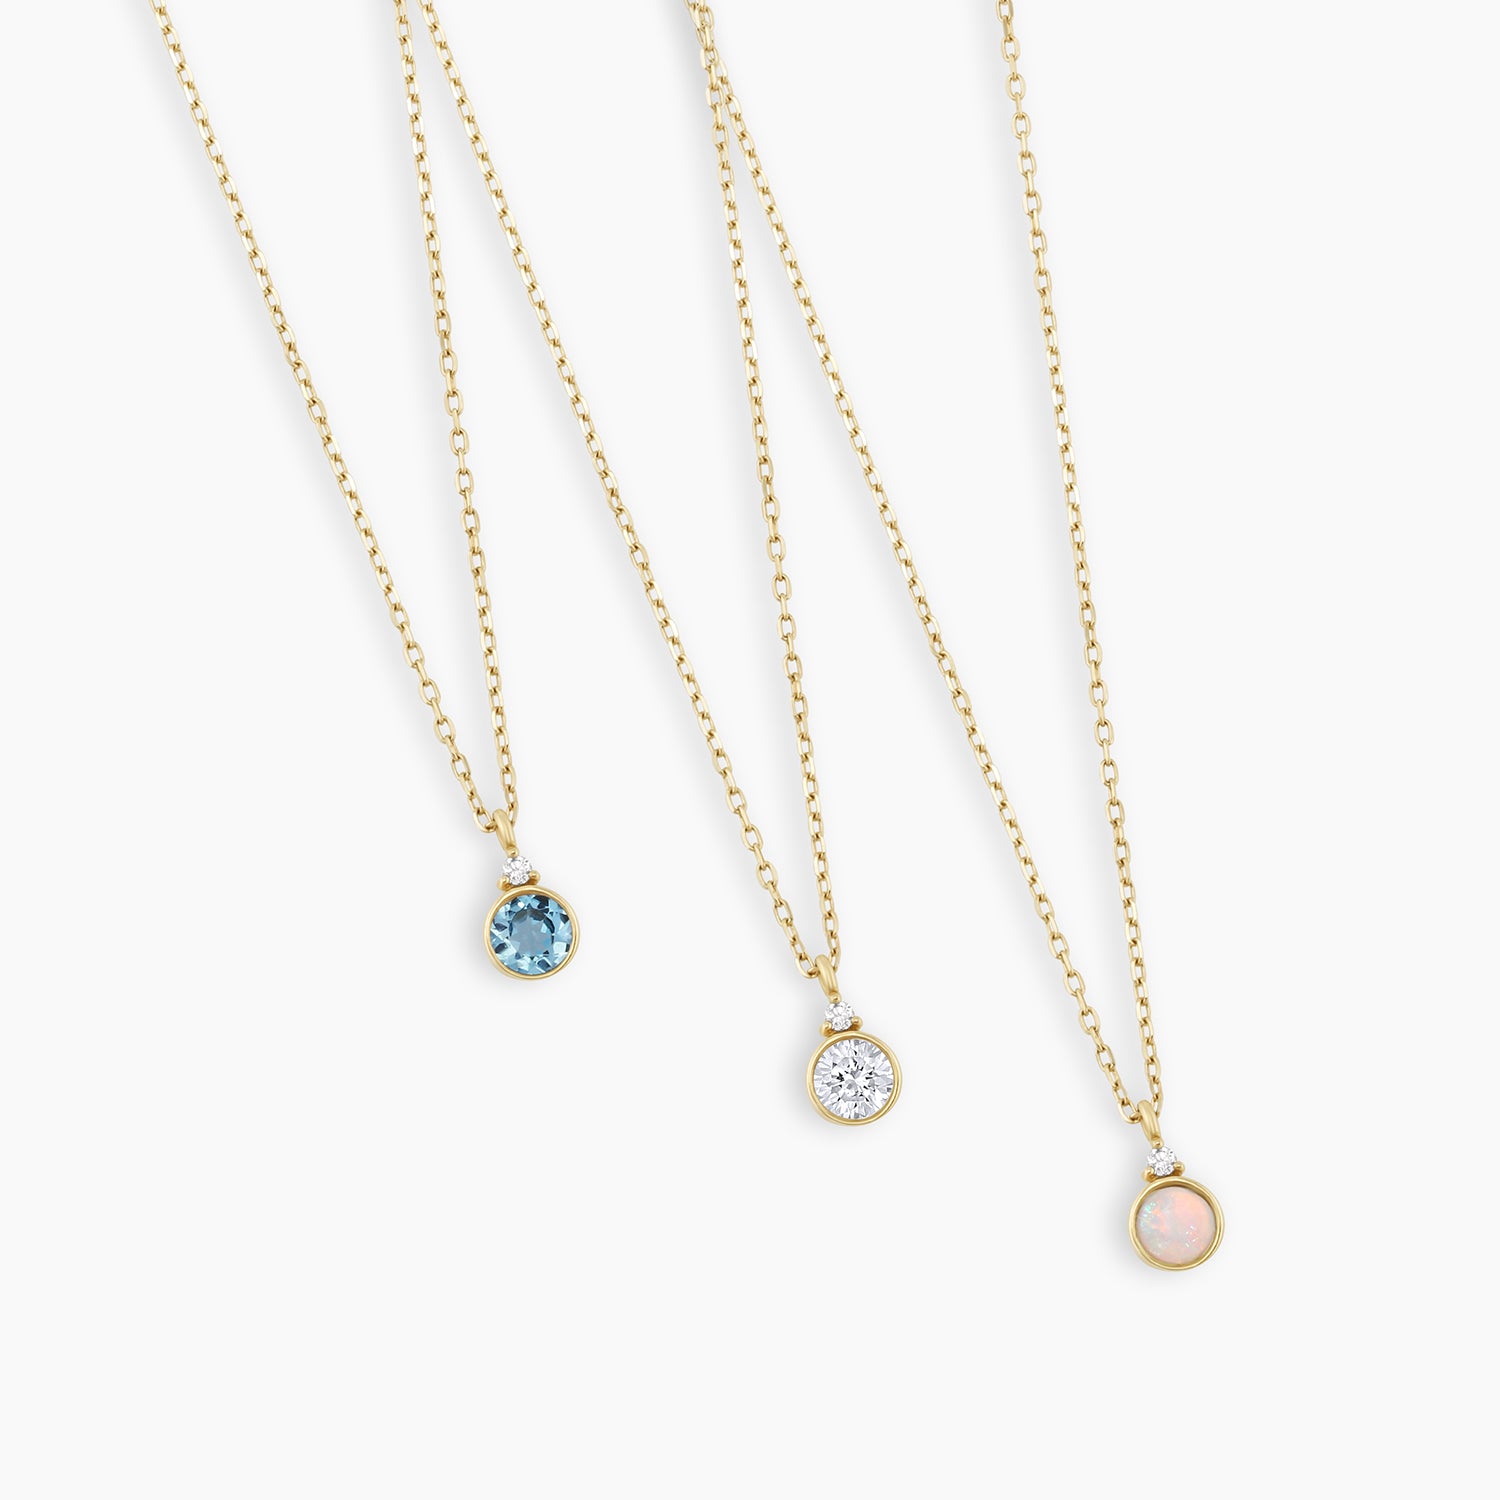 Best Initial Birthstone Necklace for Mom – Get Engravings